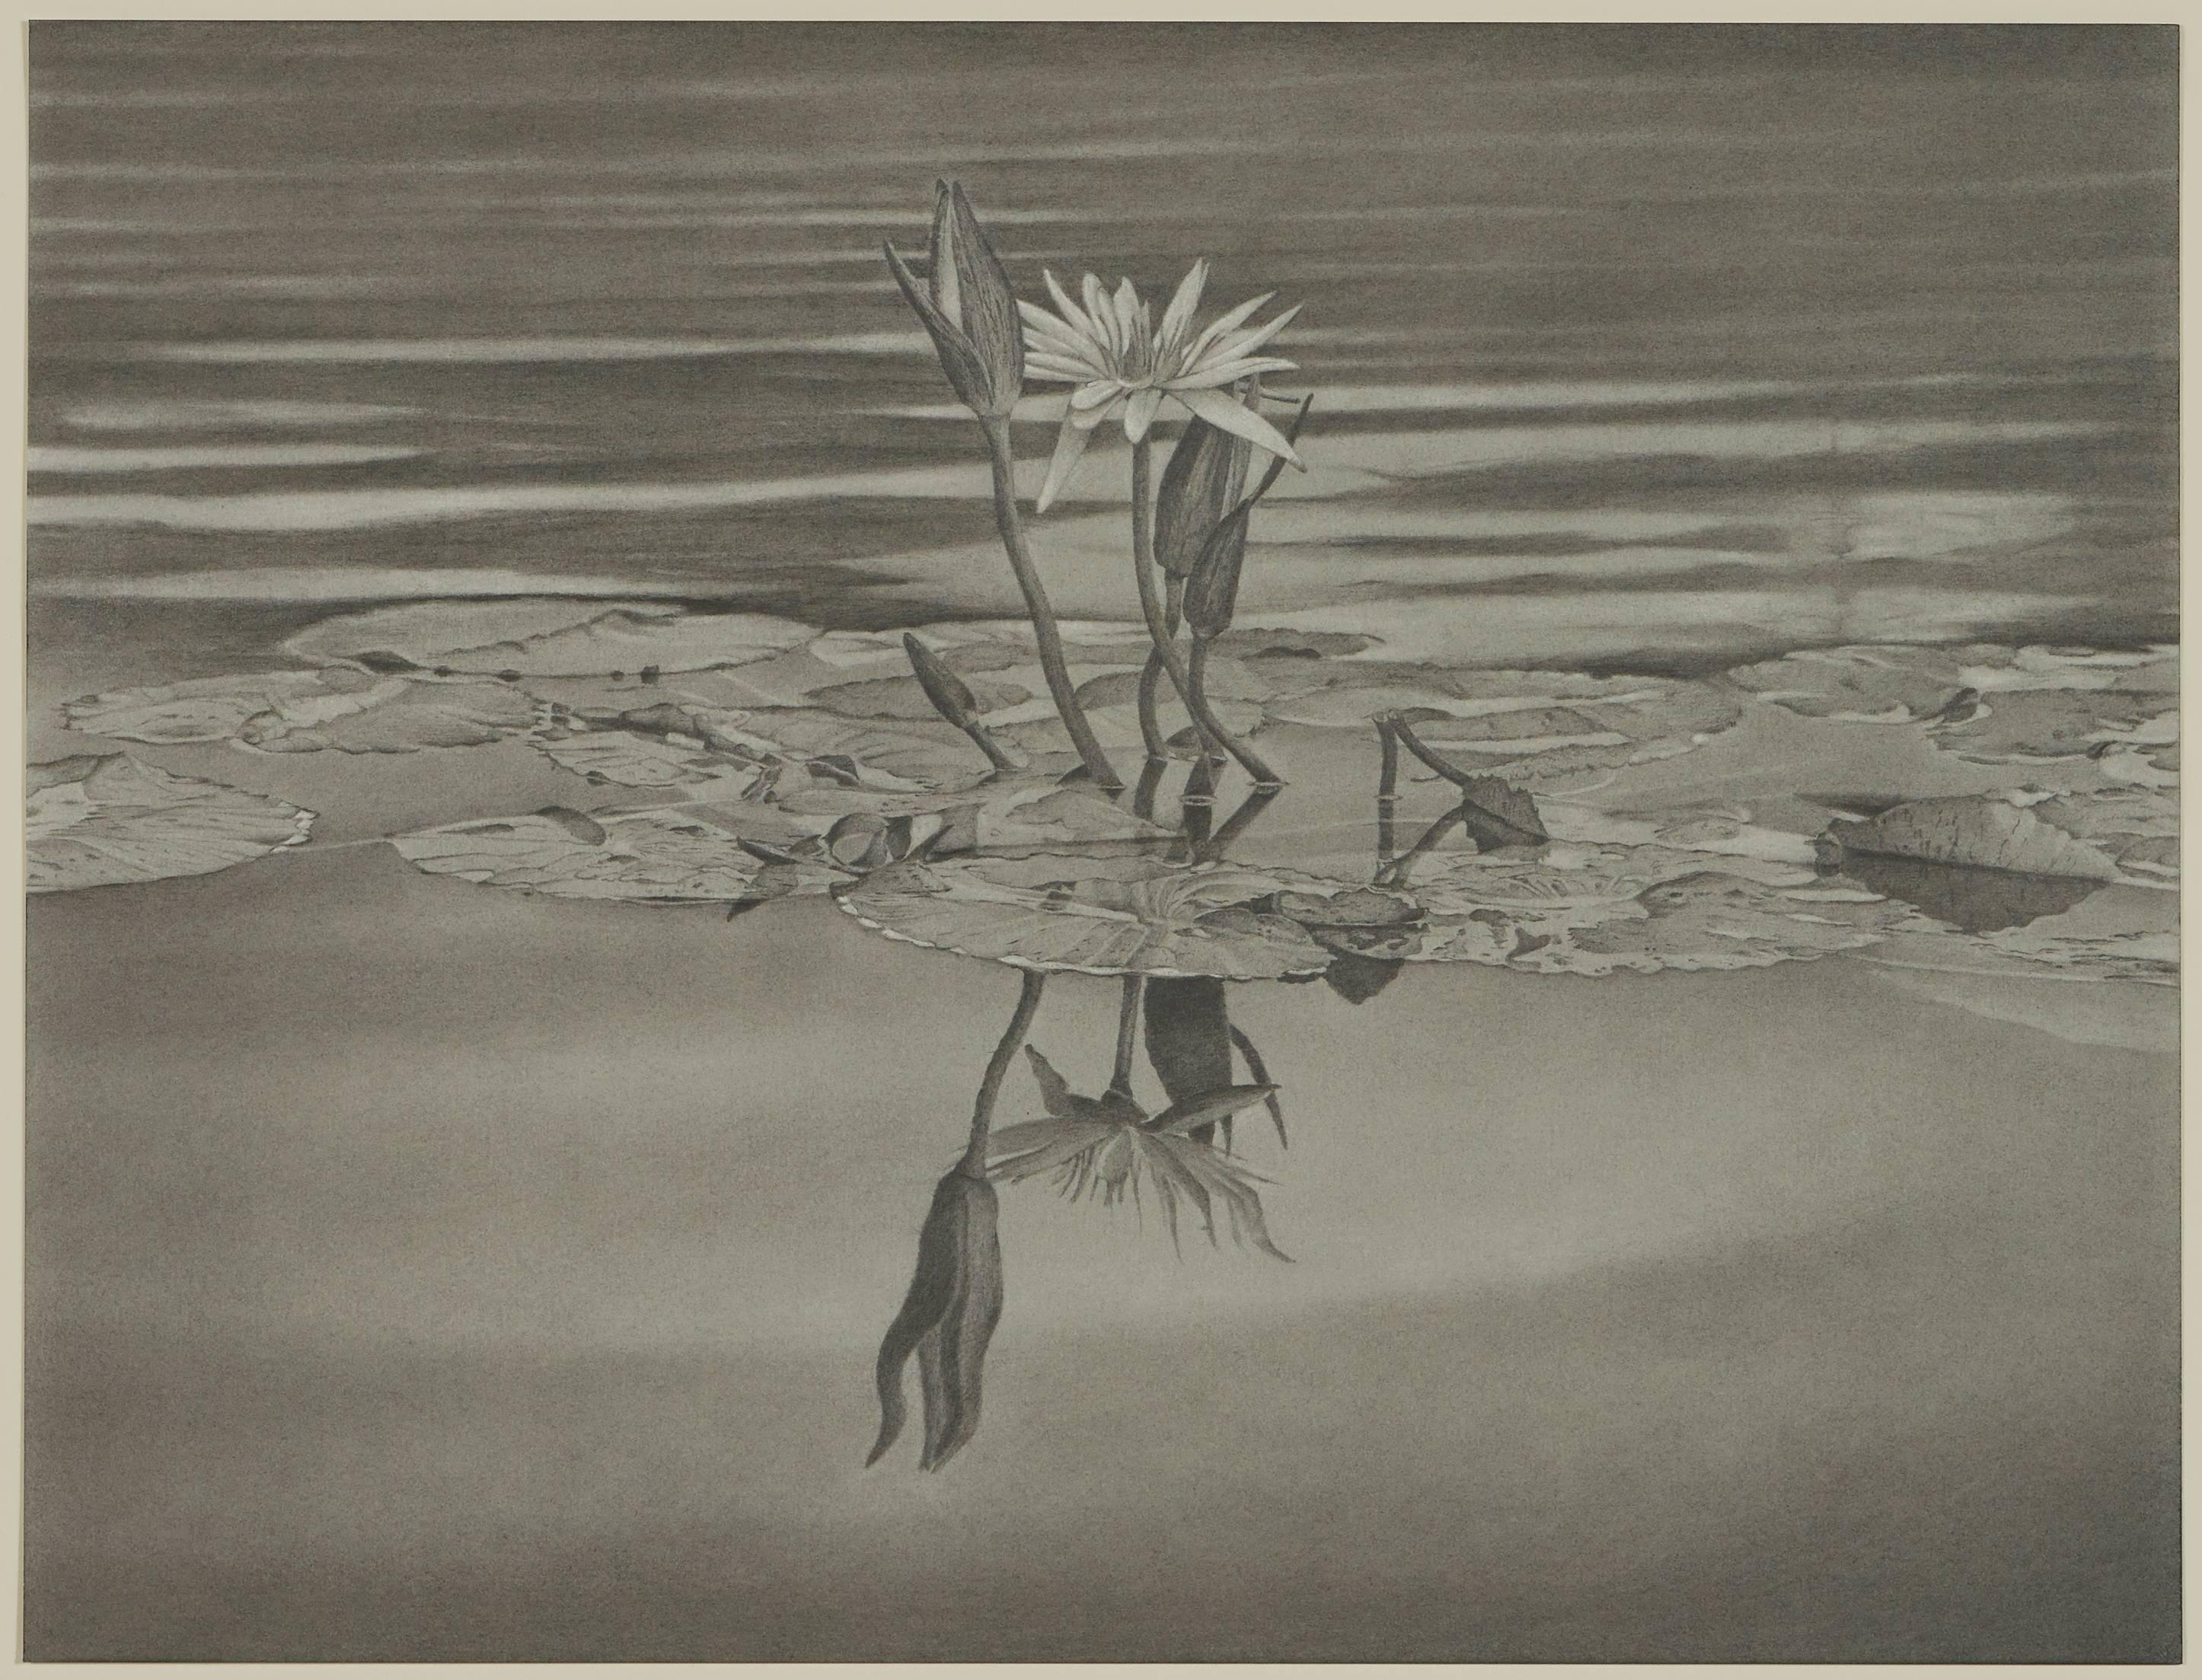 Reilly uses a toning technique to endow her graphite works with a smooth, seamless quality. Rather than distinct outlines, her flower petals glide gracefully into the surrounding water. It is this sense of delicacy, coupled with precision of her